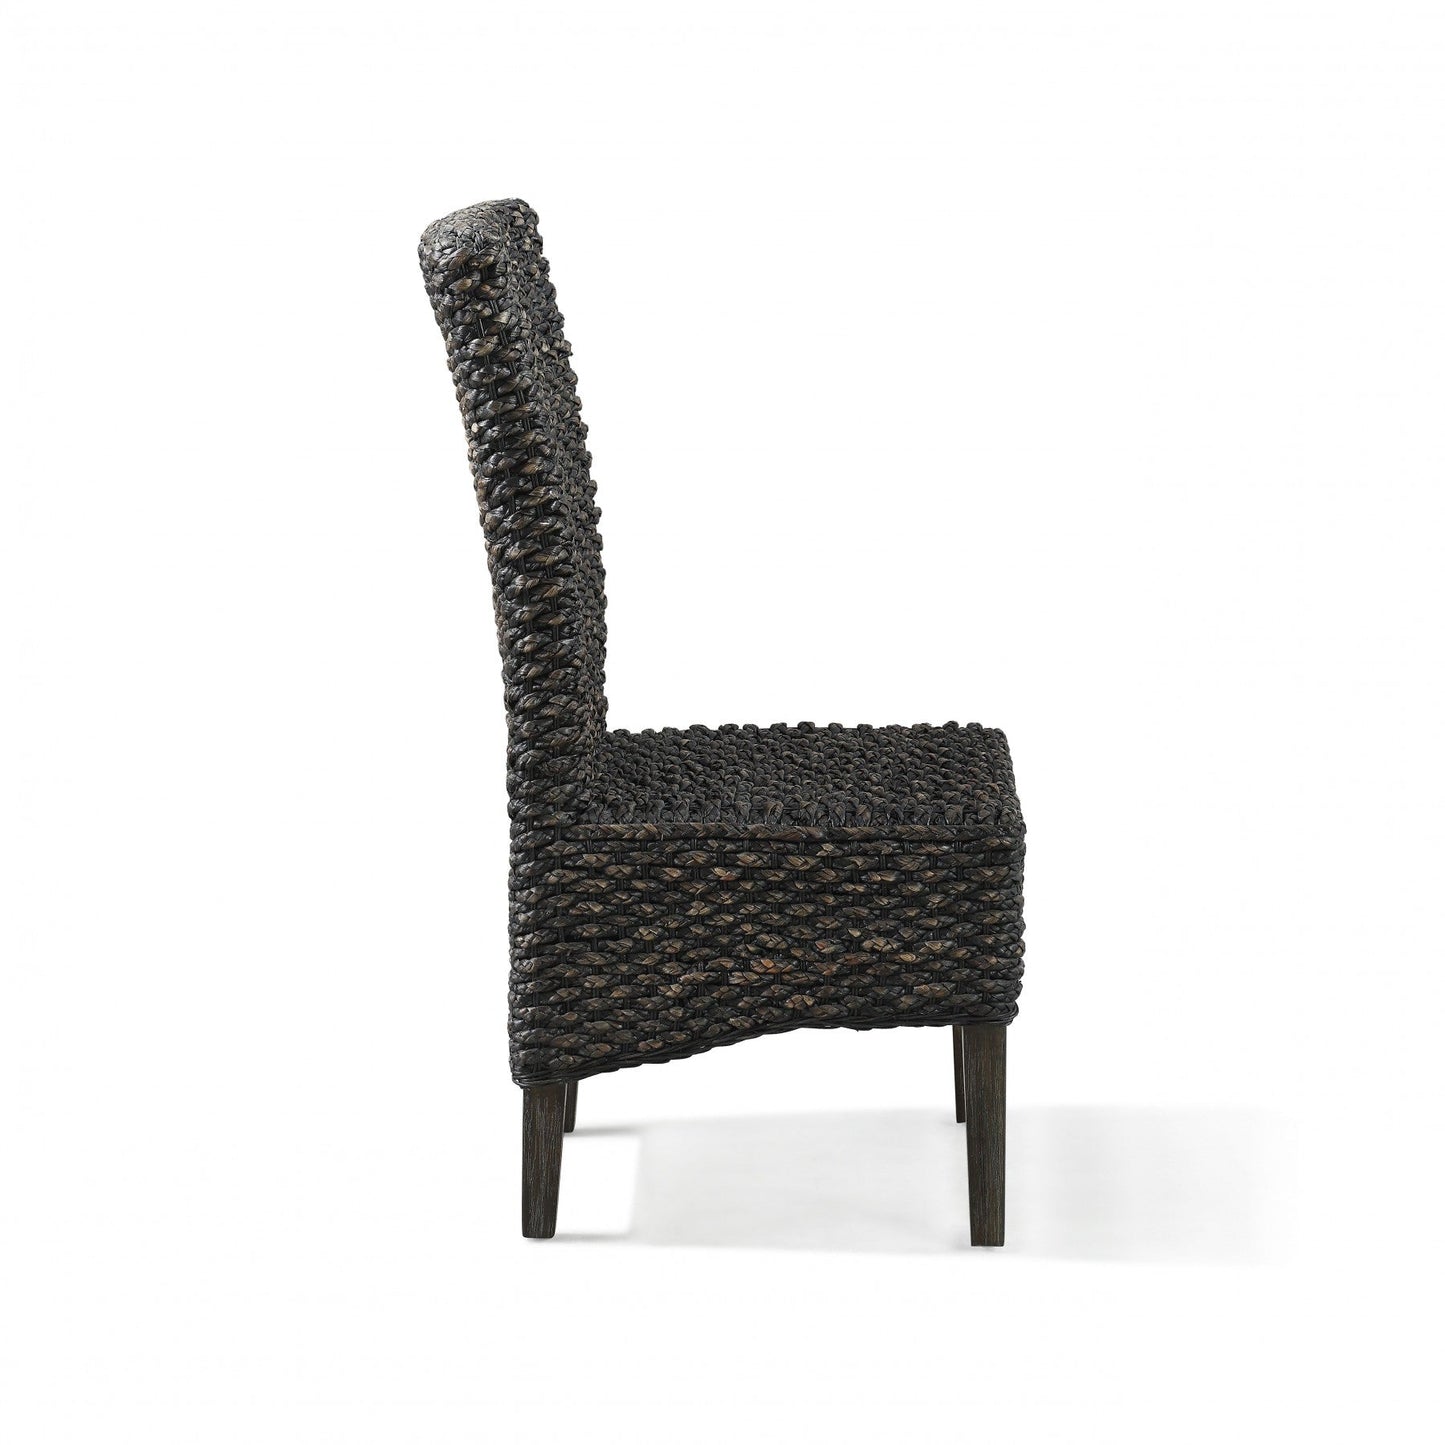 Modus Meadow 2 Chair Water Hyacinth in Graphite